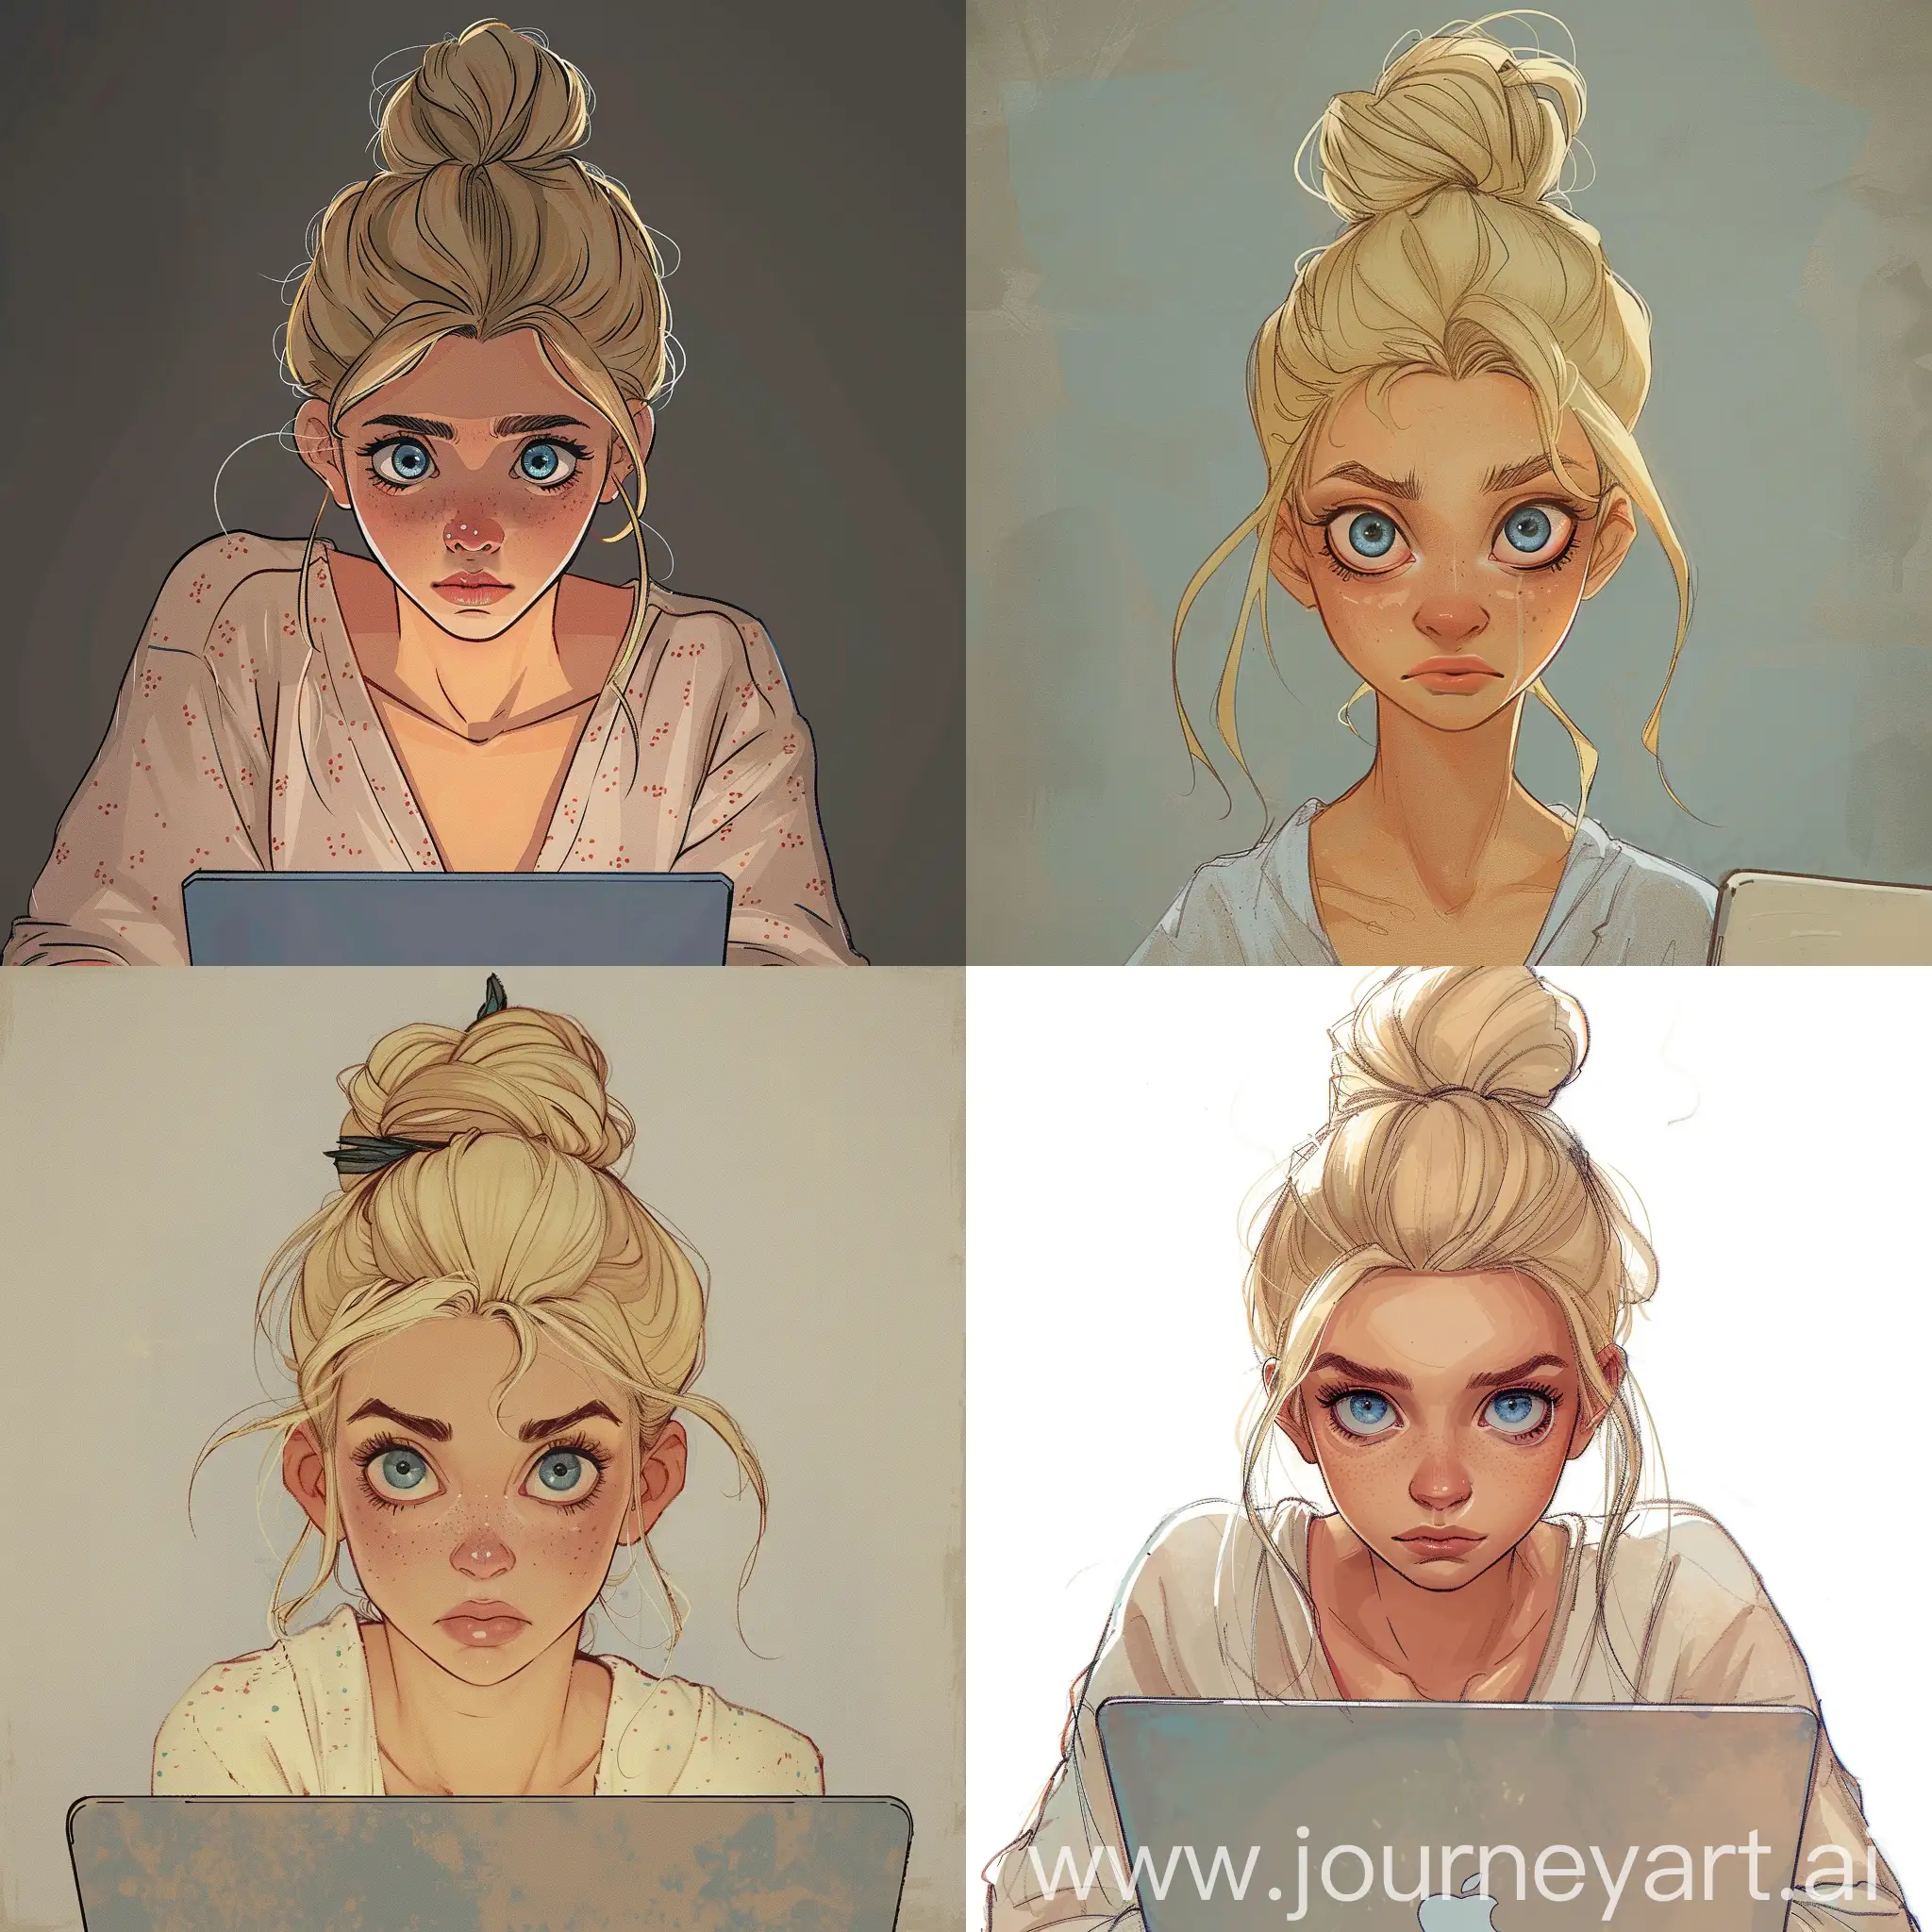 32-years-old woman after a sleepless night trying to work in front of the laptop. Blond with blue eyes. hair tied up in a bun and wearing loungewear, with circles under the eyes. Disney princess 